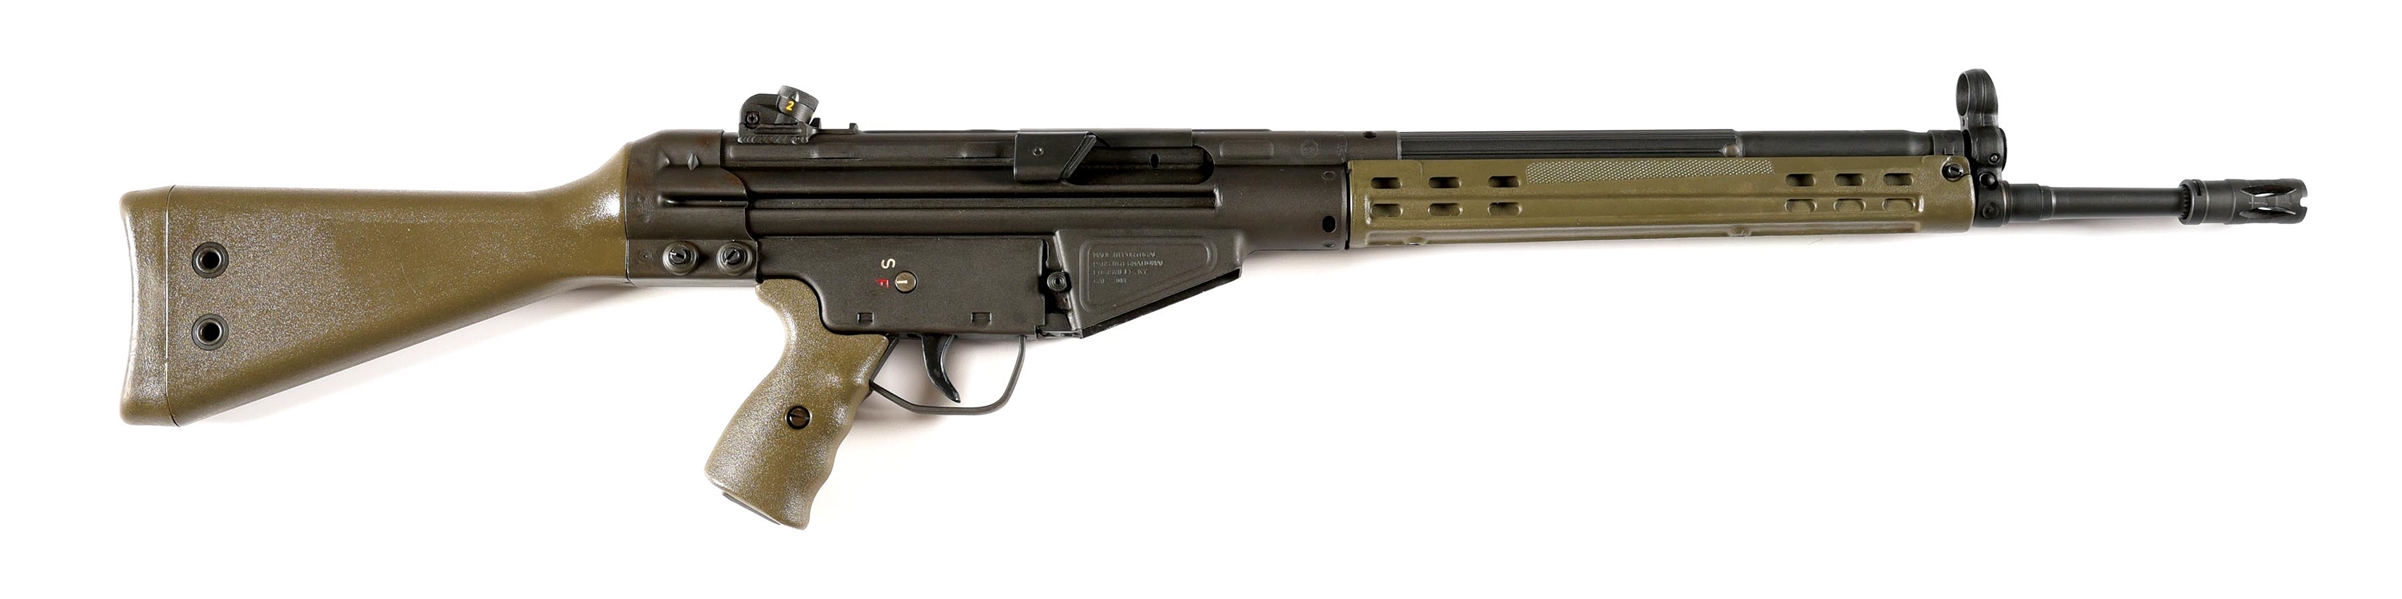 (M) EXTREMELY FINE PRE-BAN PORTUGESE FMP G3S SEMI-AUTOMATIC RIFLE.